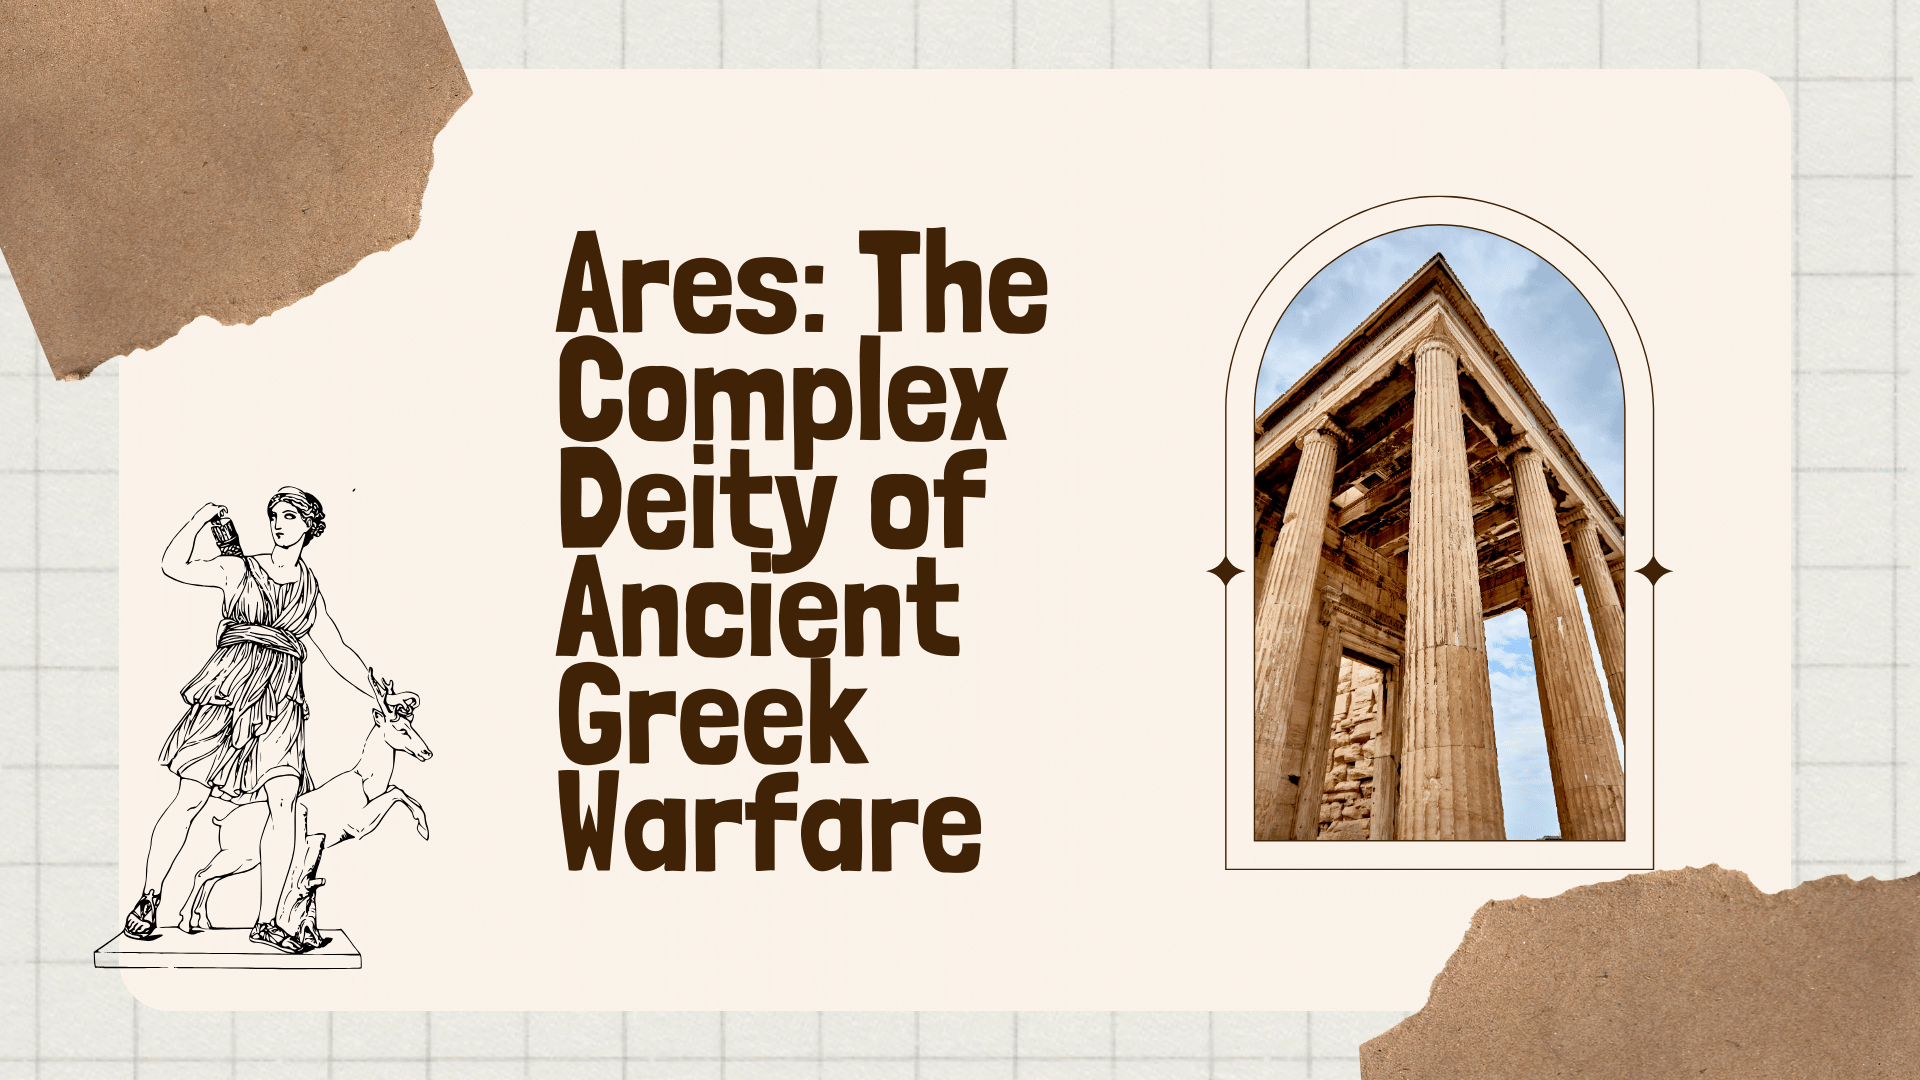 Ares: The Complex Deity of Ancient Greek Warfare